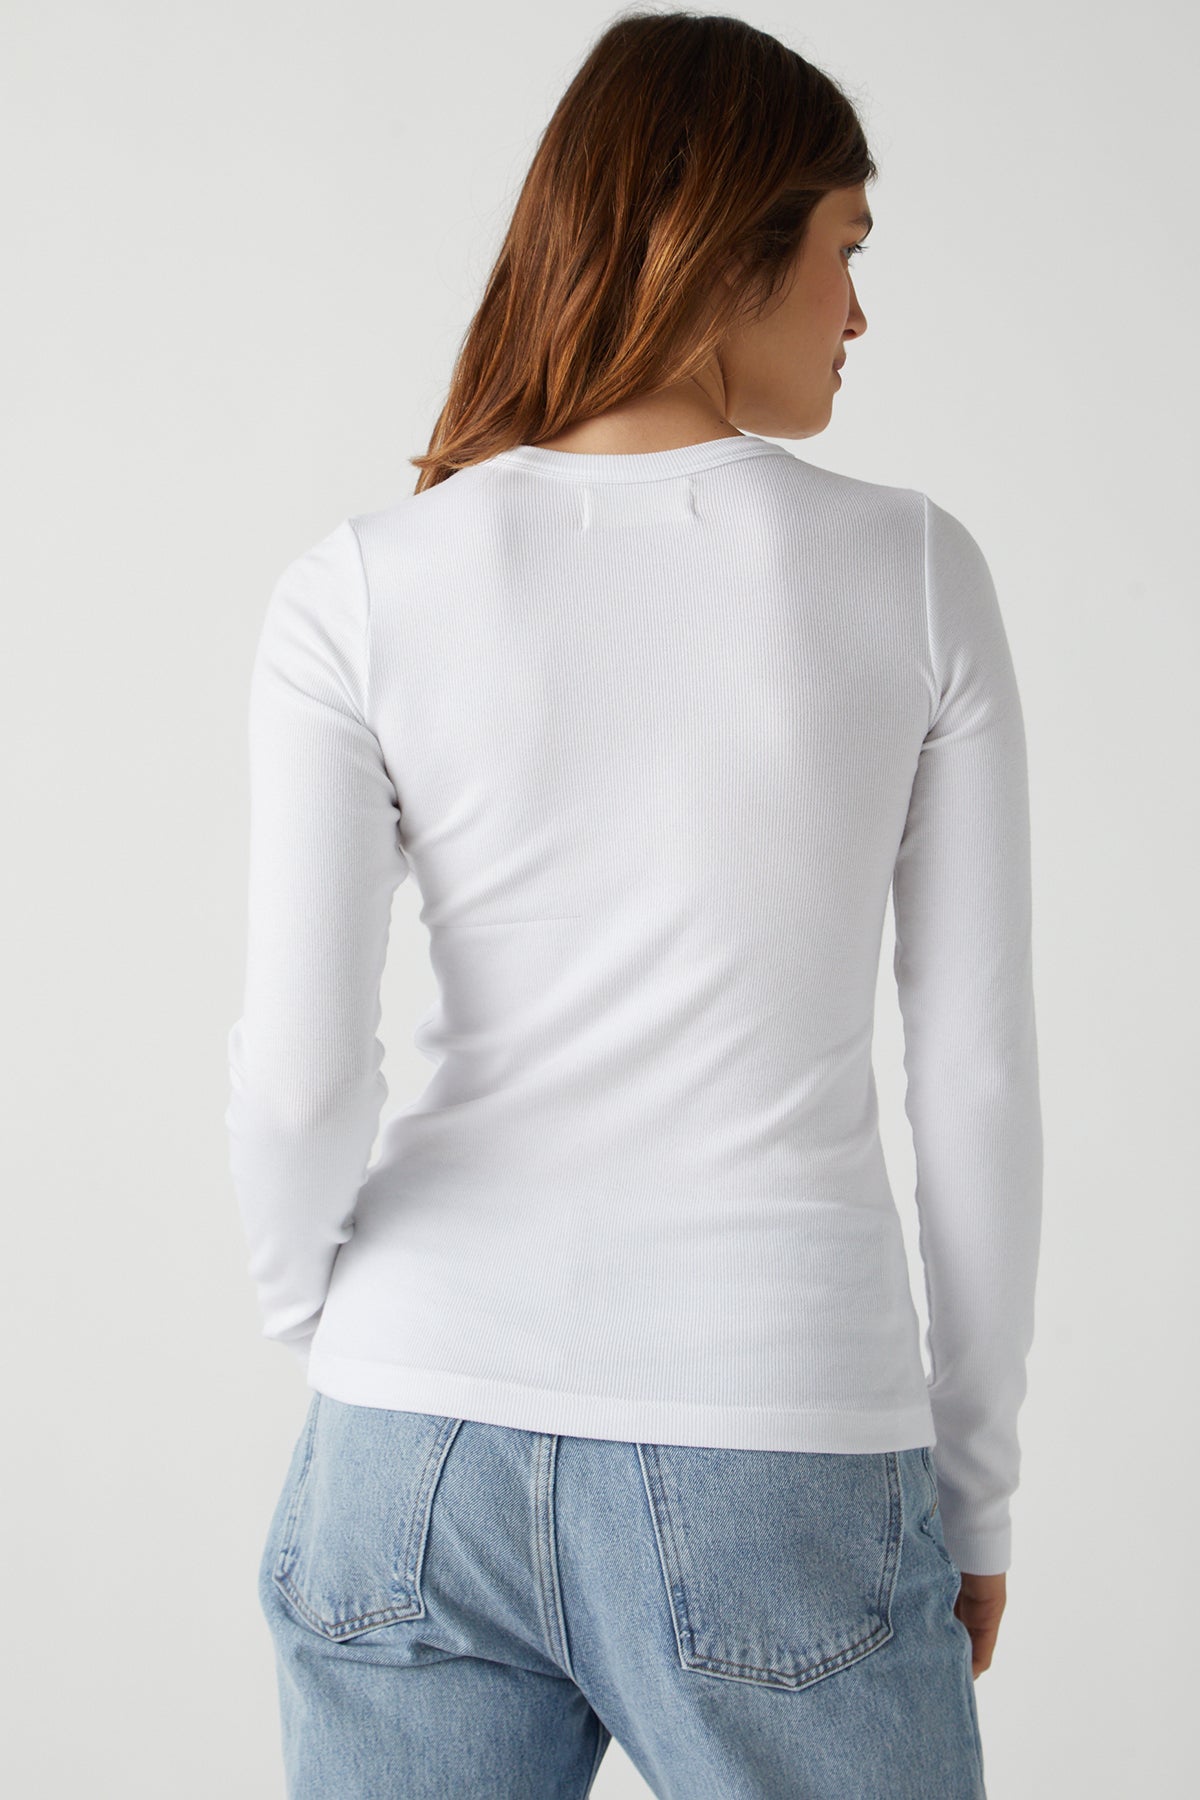 Camino Tee in white with blue denim back-26002801361089